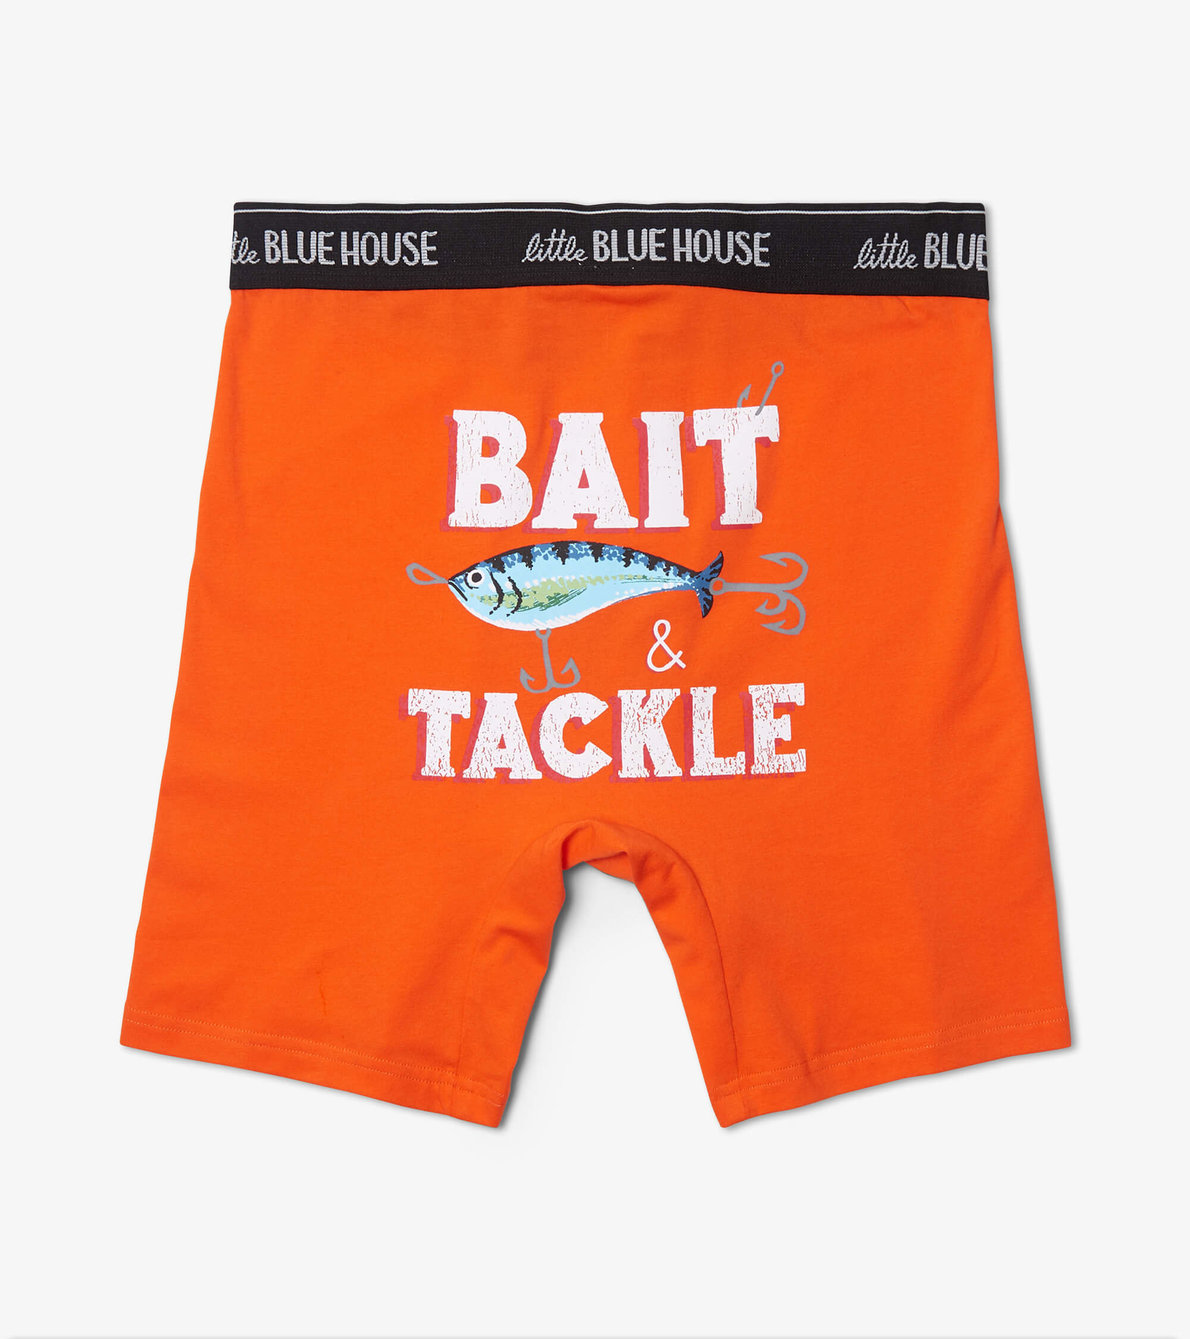 View larger image of Bait and Tackle Men's Boxer Briefs